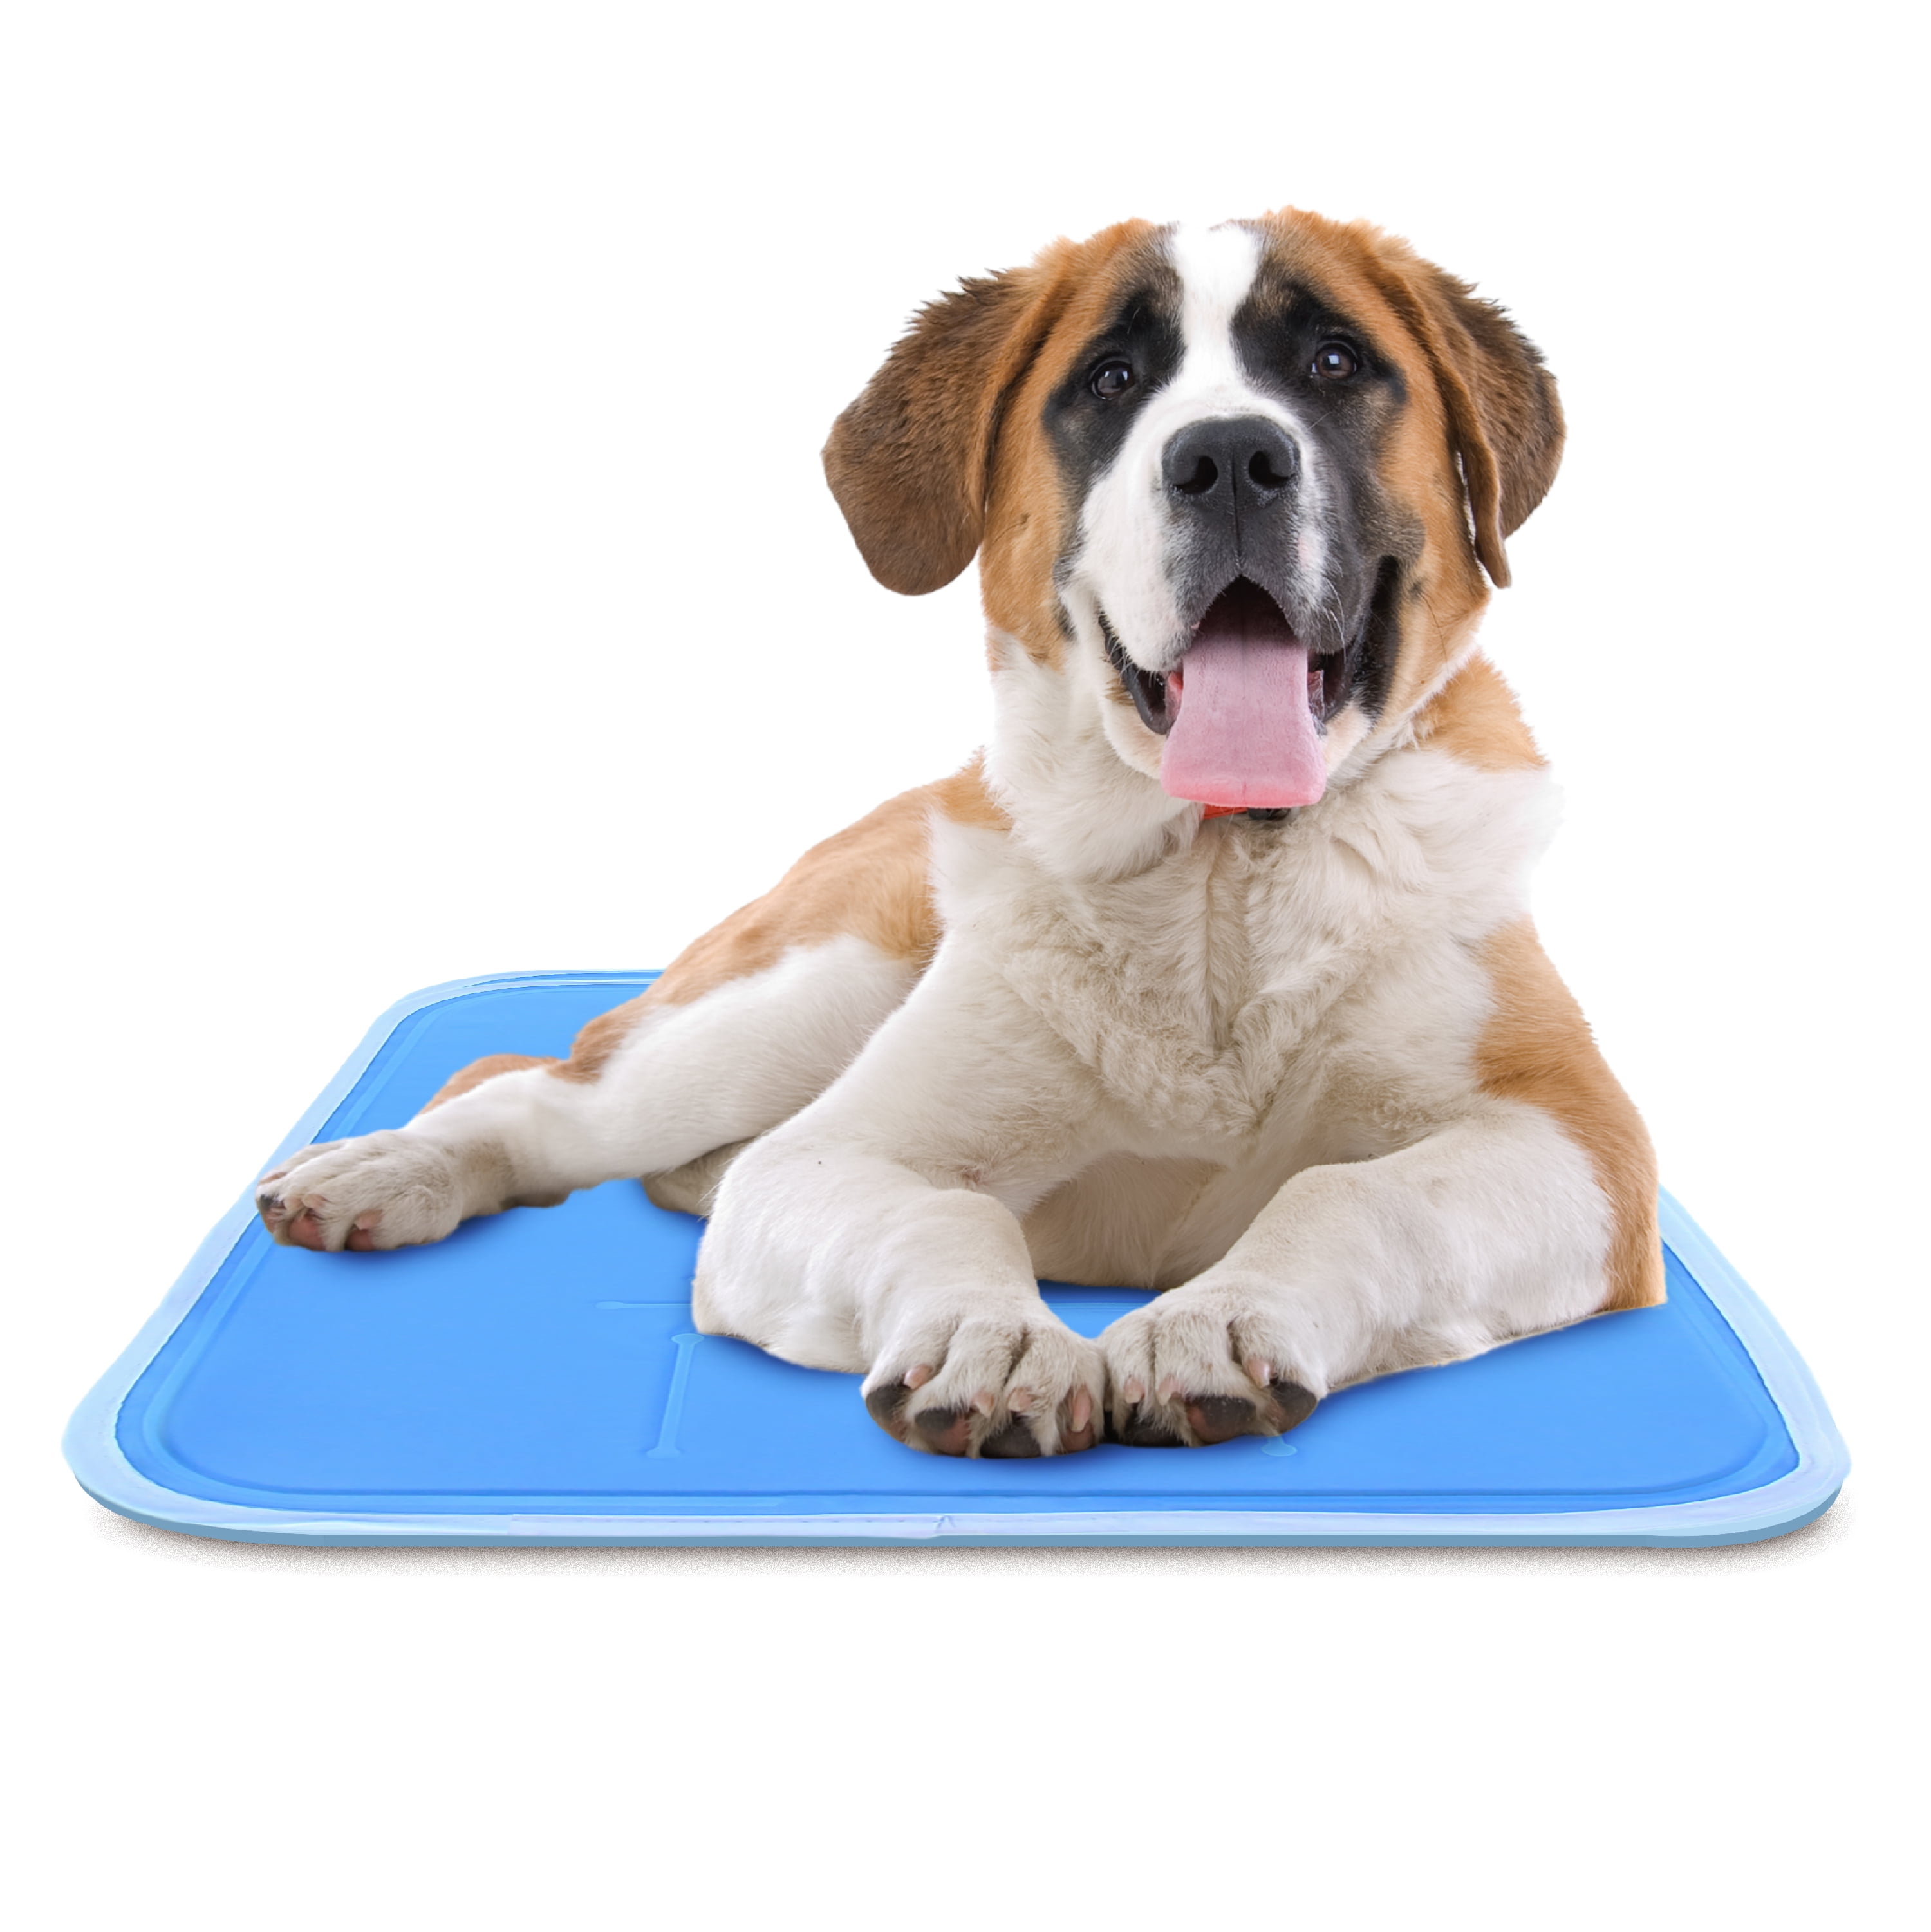 LARGE SELF COOLING COOL GEL MAT PET DOG CAT HEAT RELIEF NON-TOXIC SUMMER 